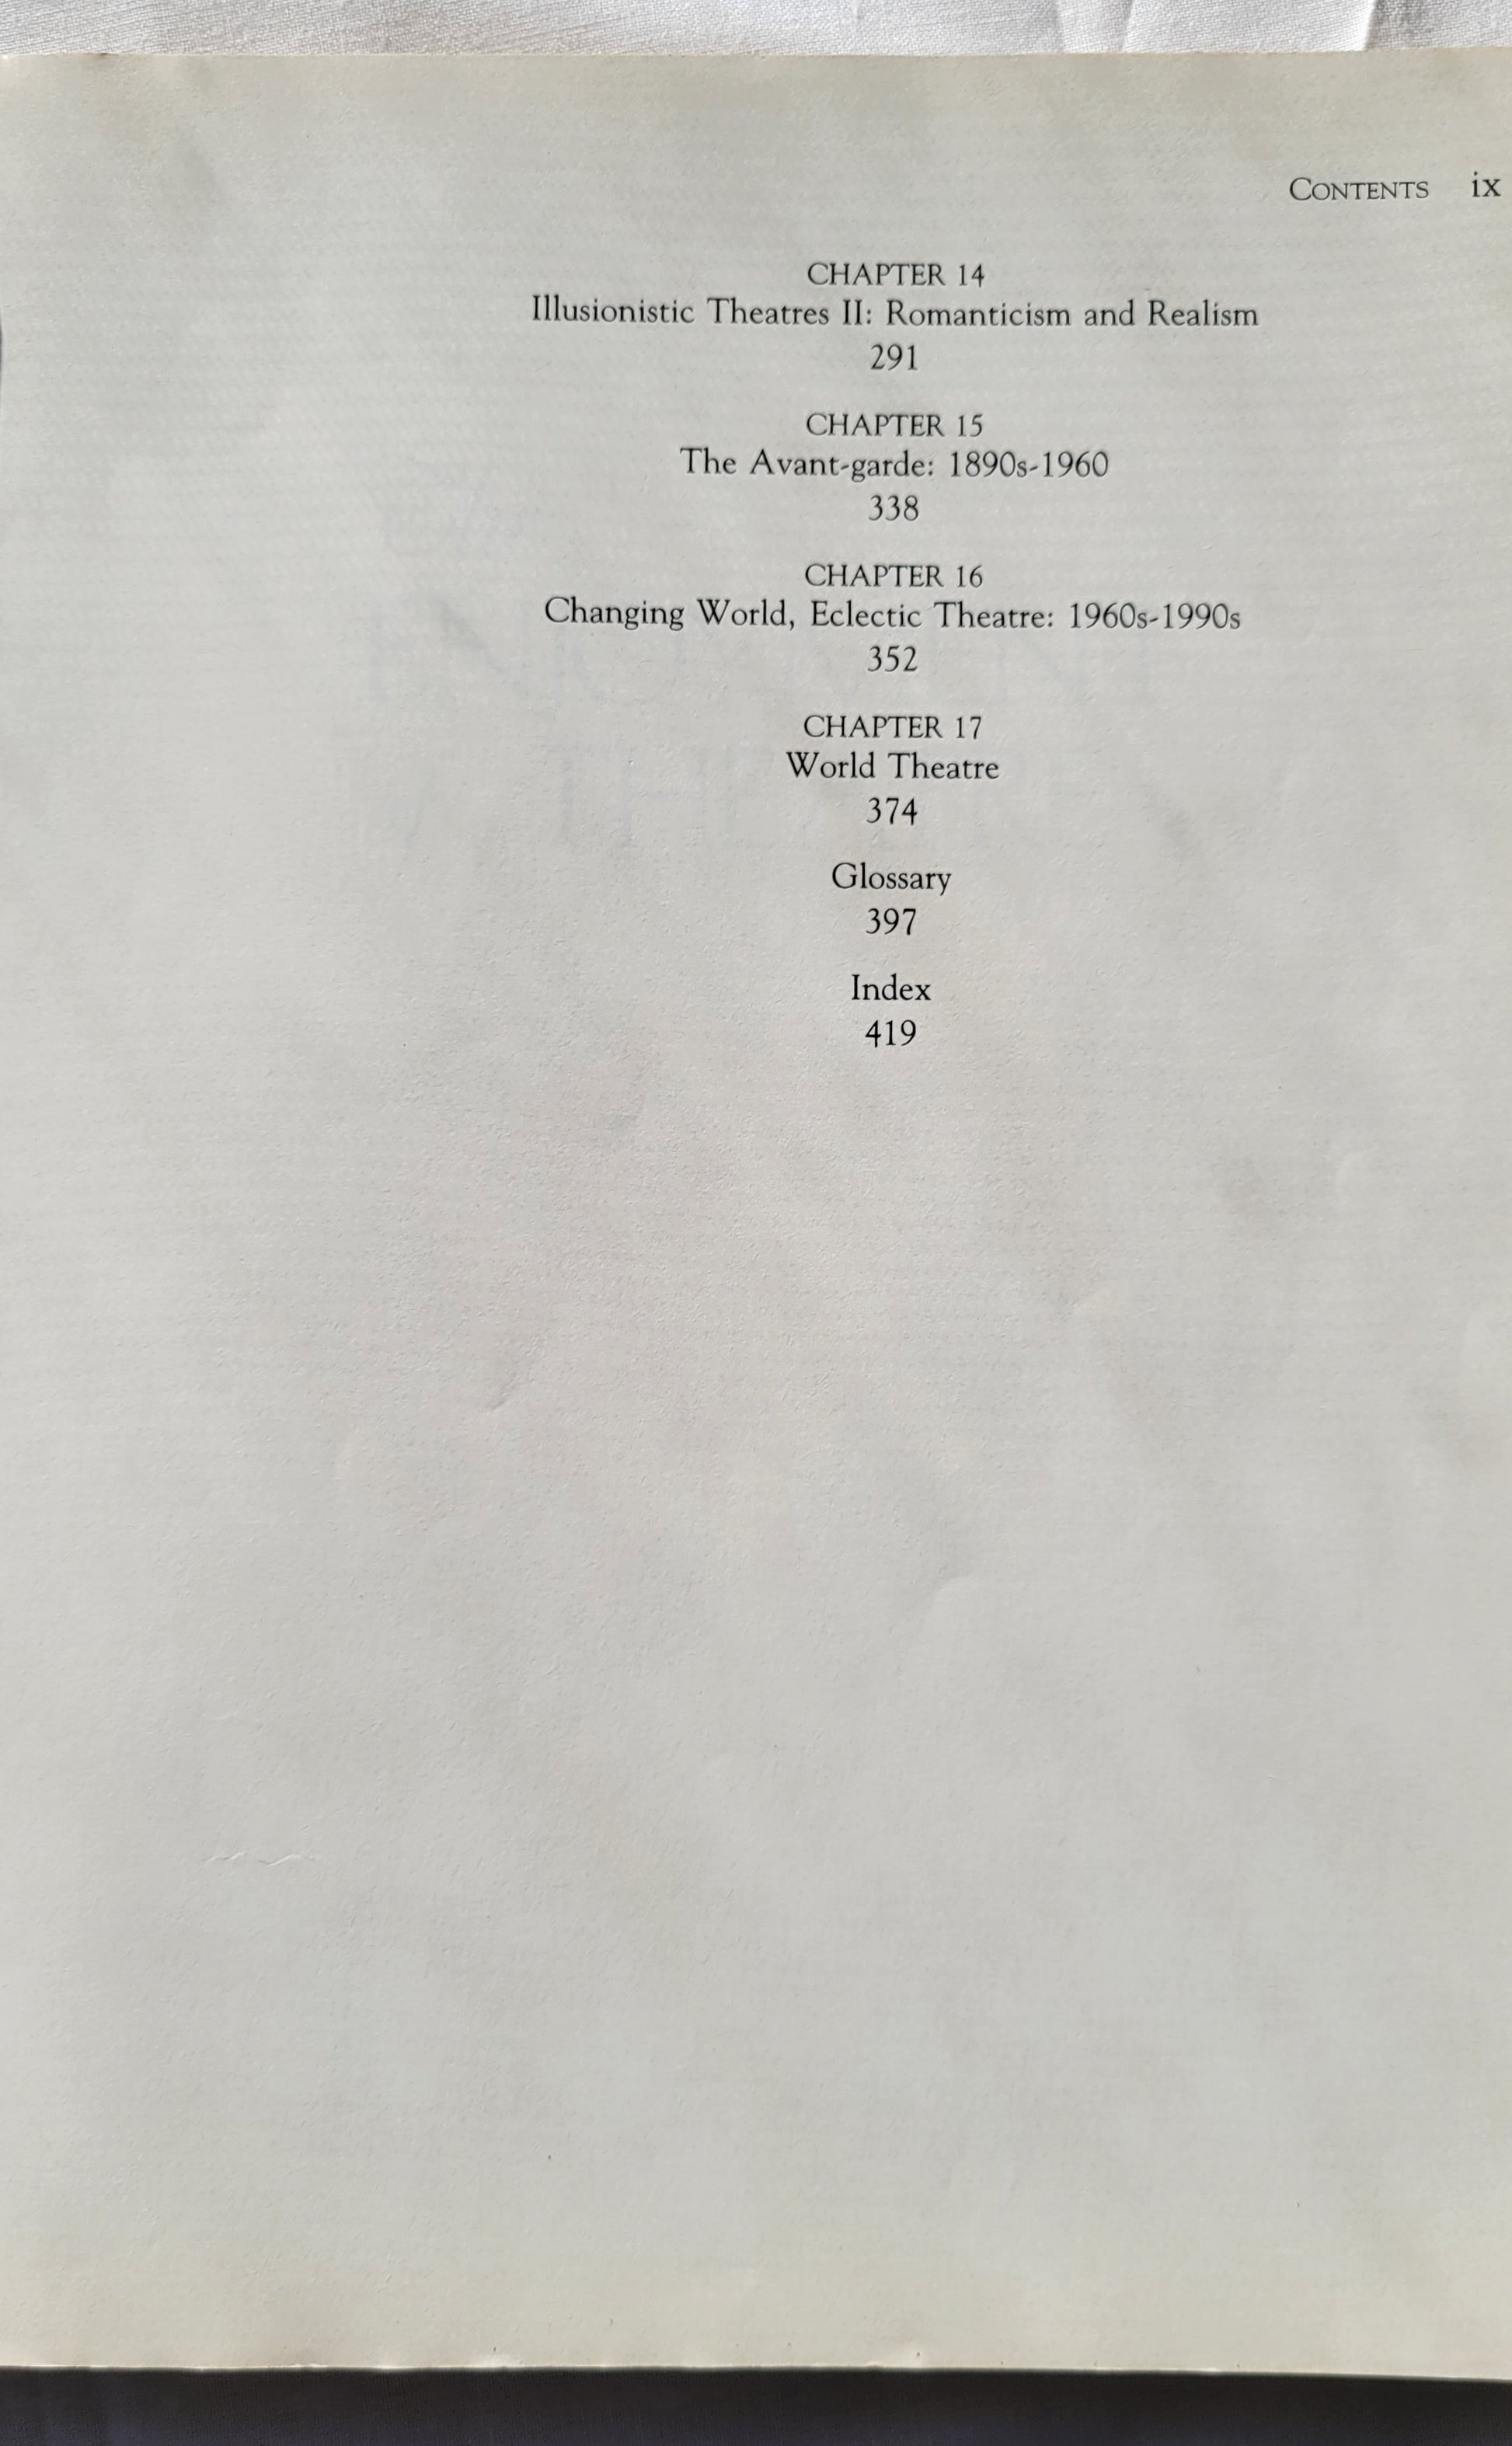 Used book for sale "The Enjoyment of Theatre: Third Edition" by Kenneth M. Cameron and Patti P. Gillespie, published by Maxwell Macmillan International in 1992. Table of contents.